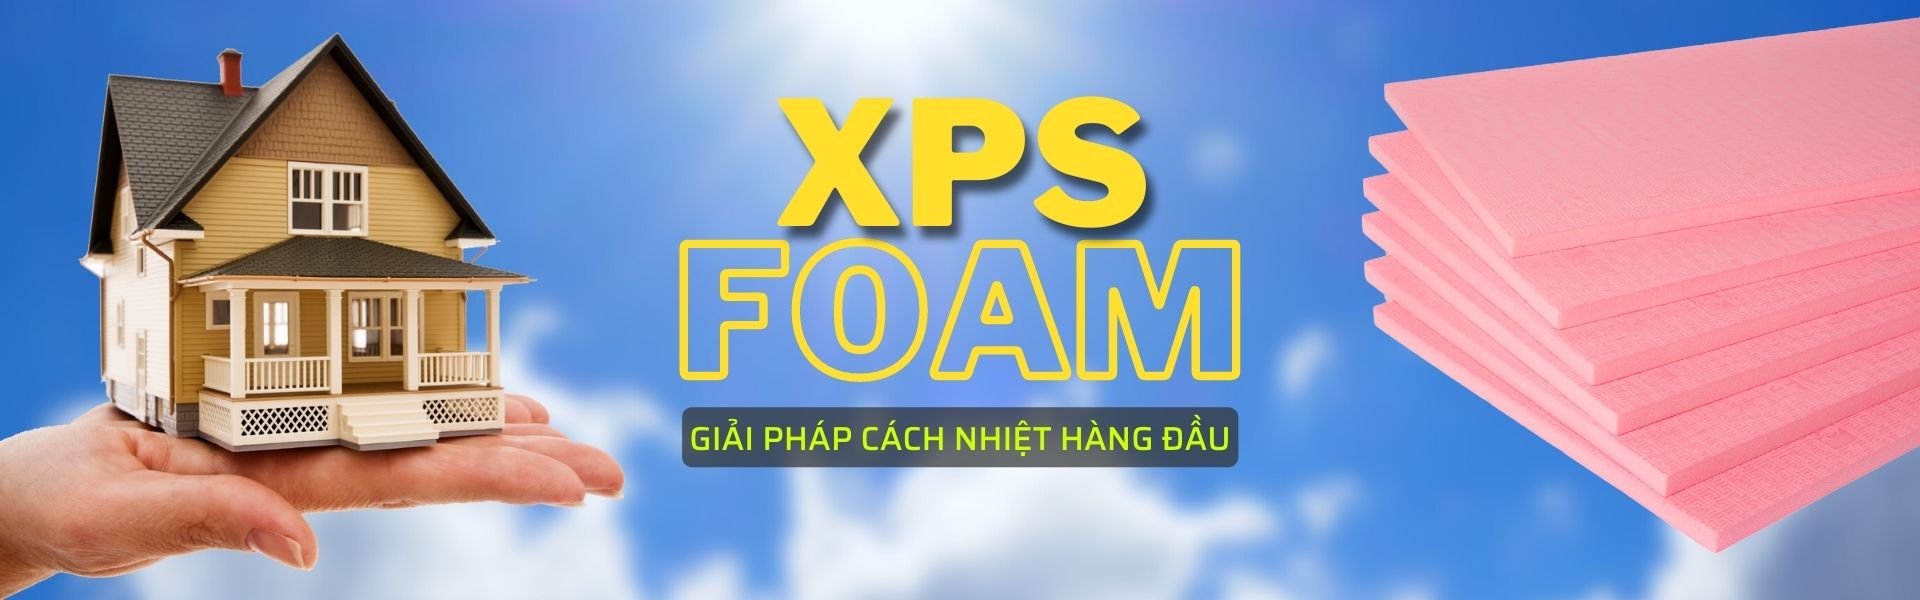 banner xps 2